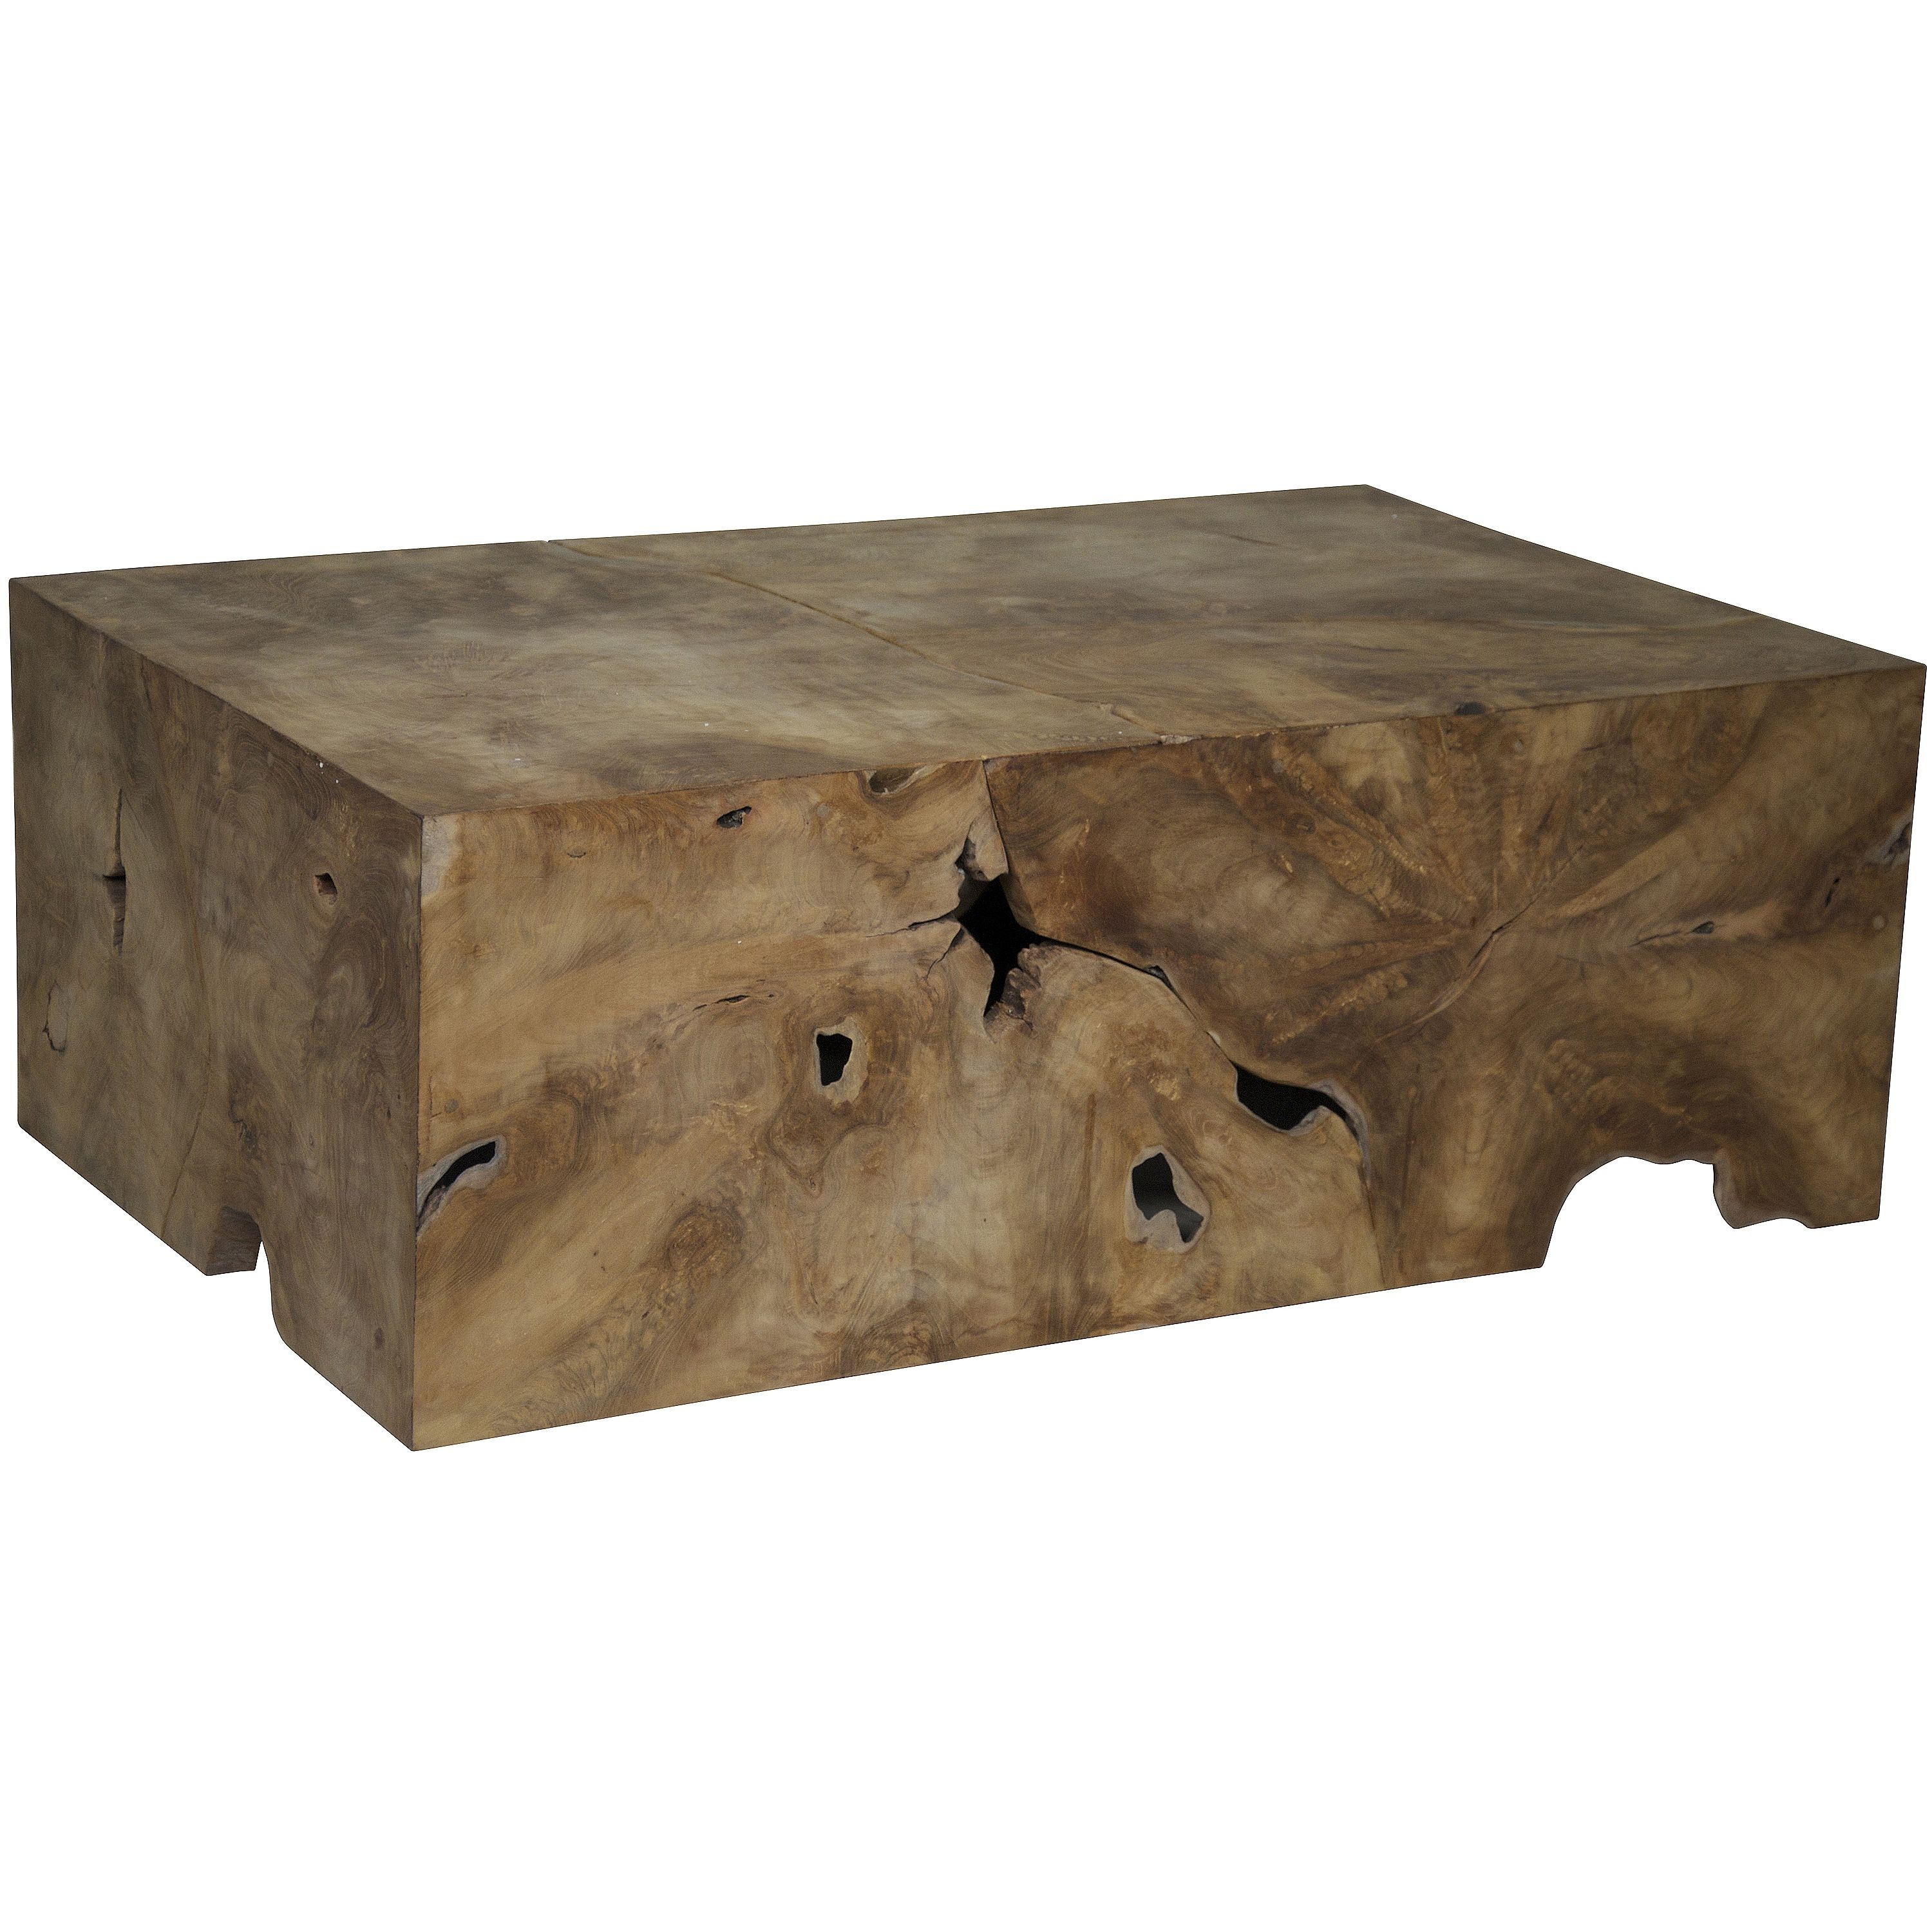 Perfectly Combing Natural Appeal With A Modern Twist, This Coffee Within Oslo Burl Wood Veneer Coffee Tables (View 9 of 30)